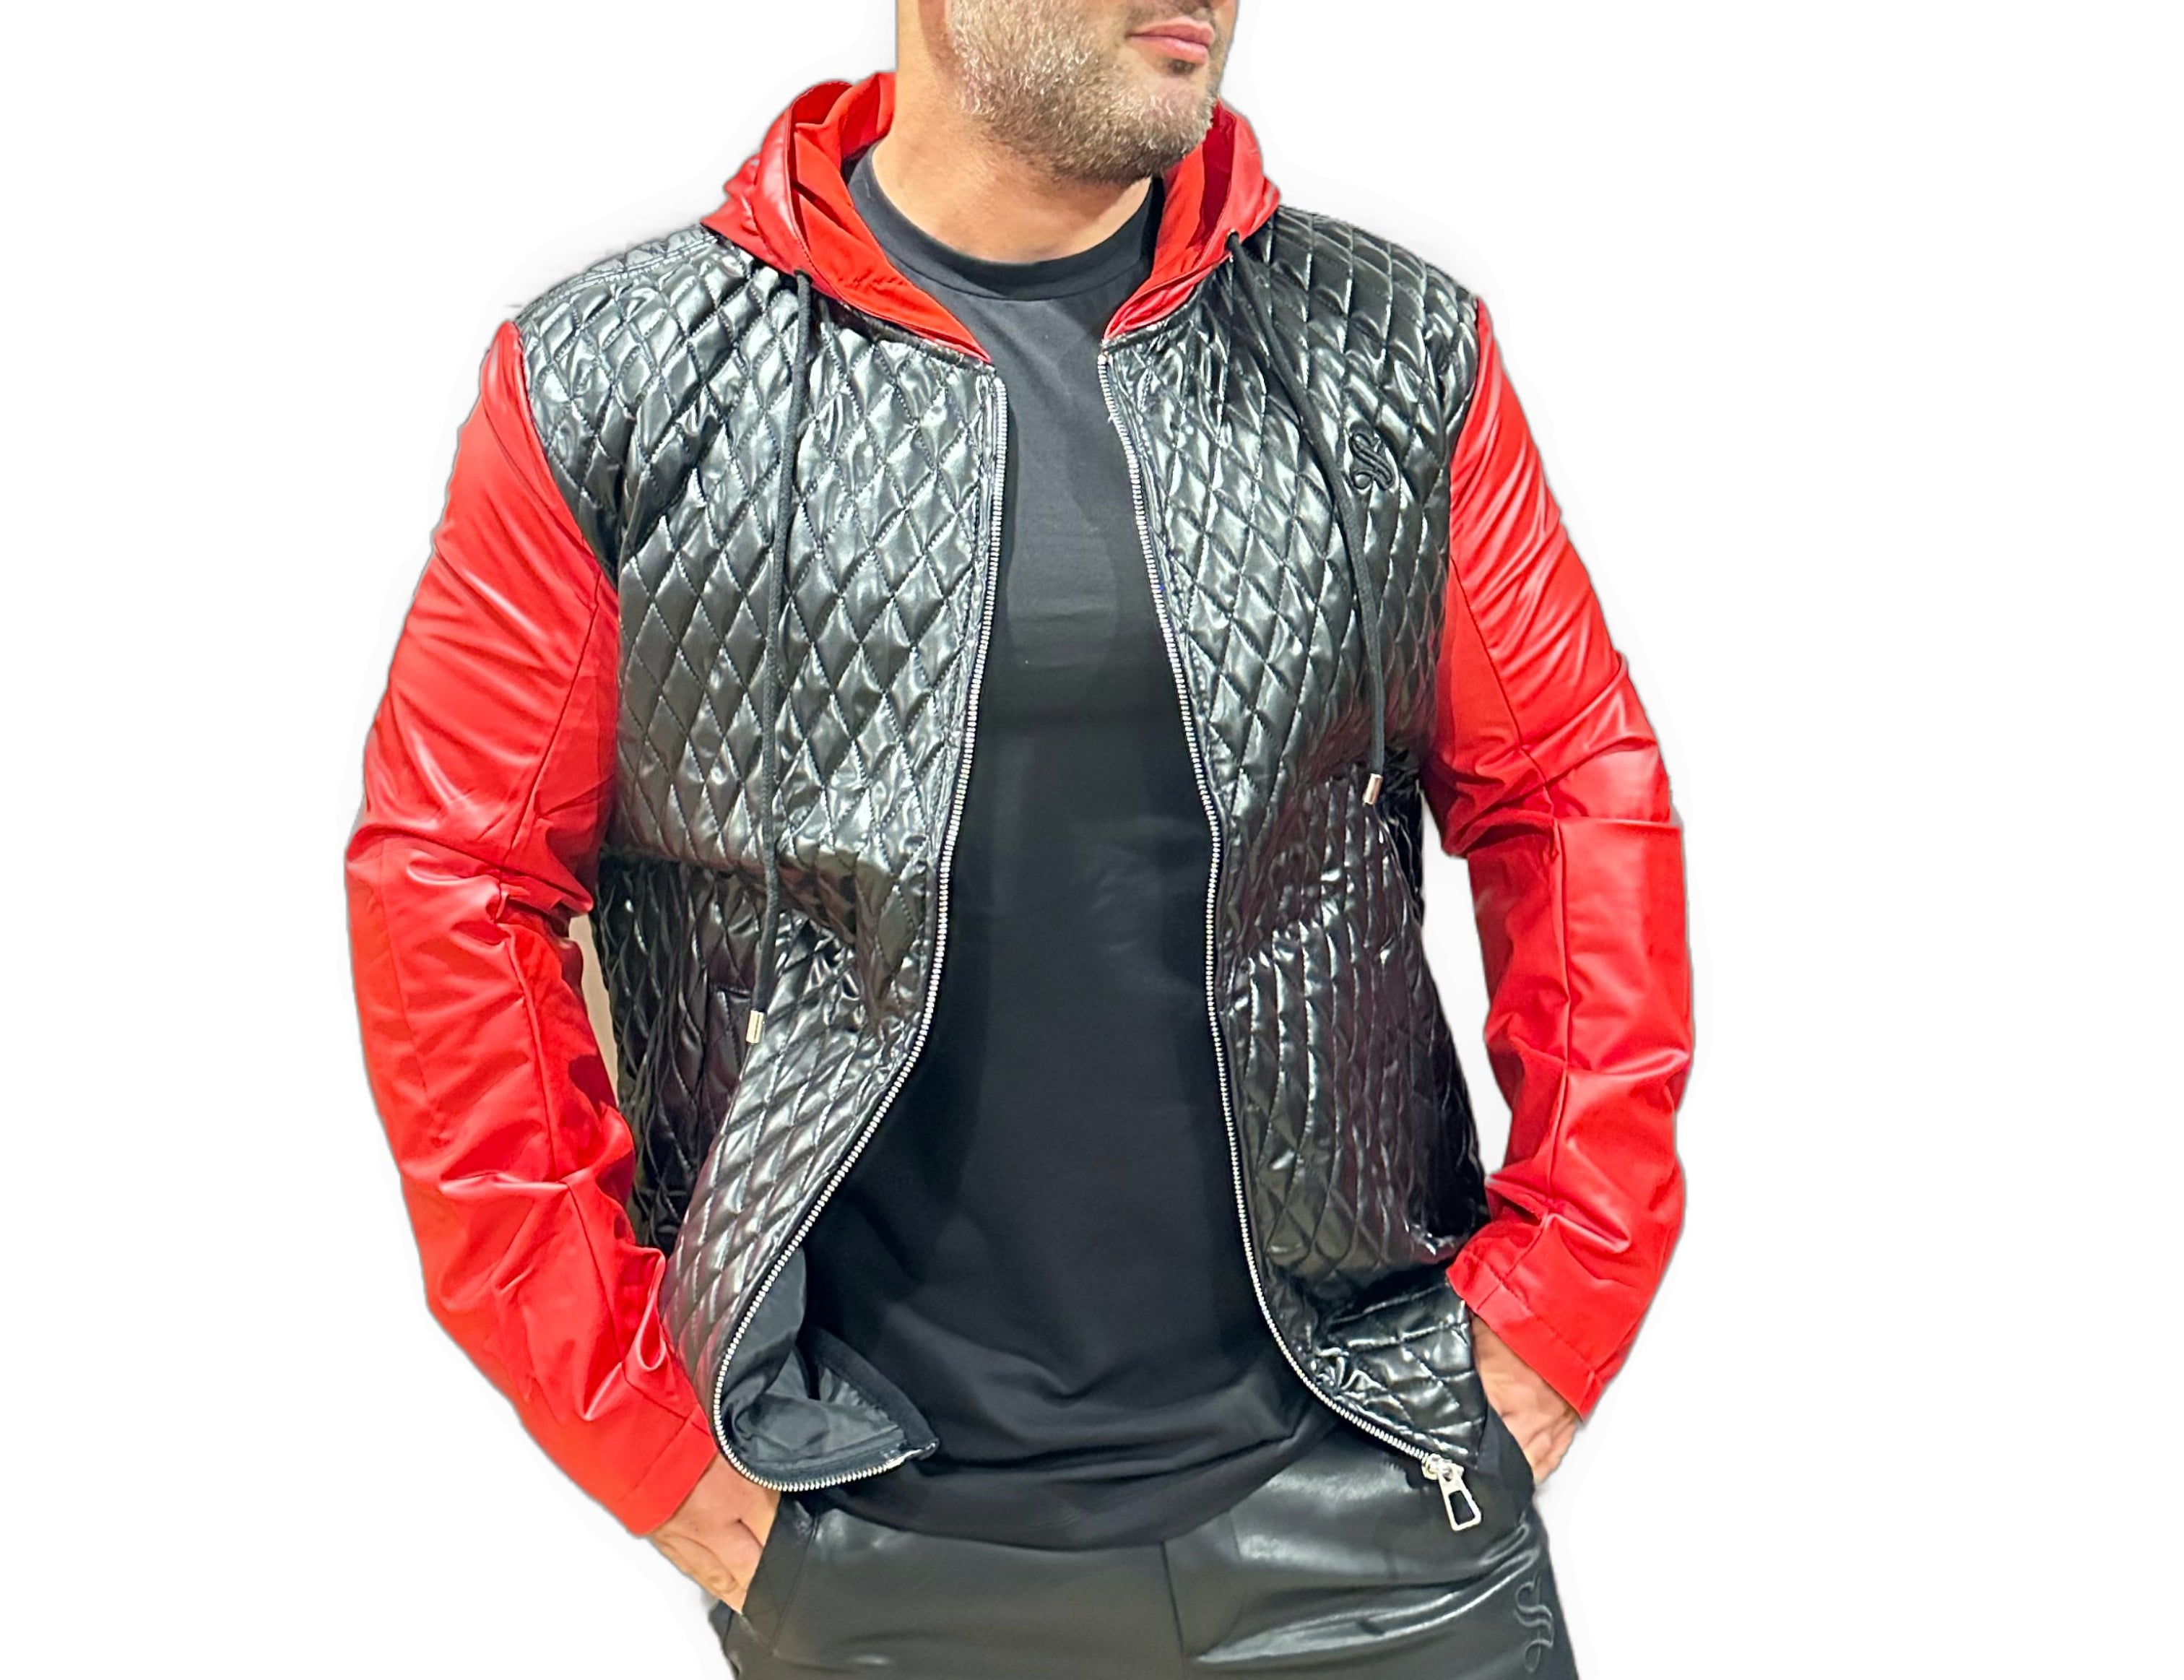 Robin 3 - Black/Red Jacket for Men - Sarman Fashion - Wholesale Clothing Fashion Brand for Men from Canada